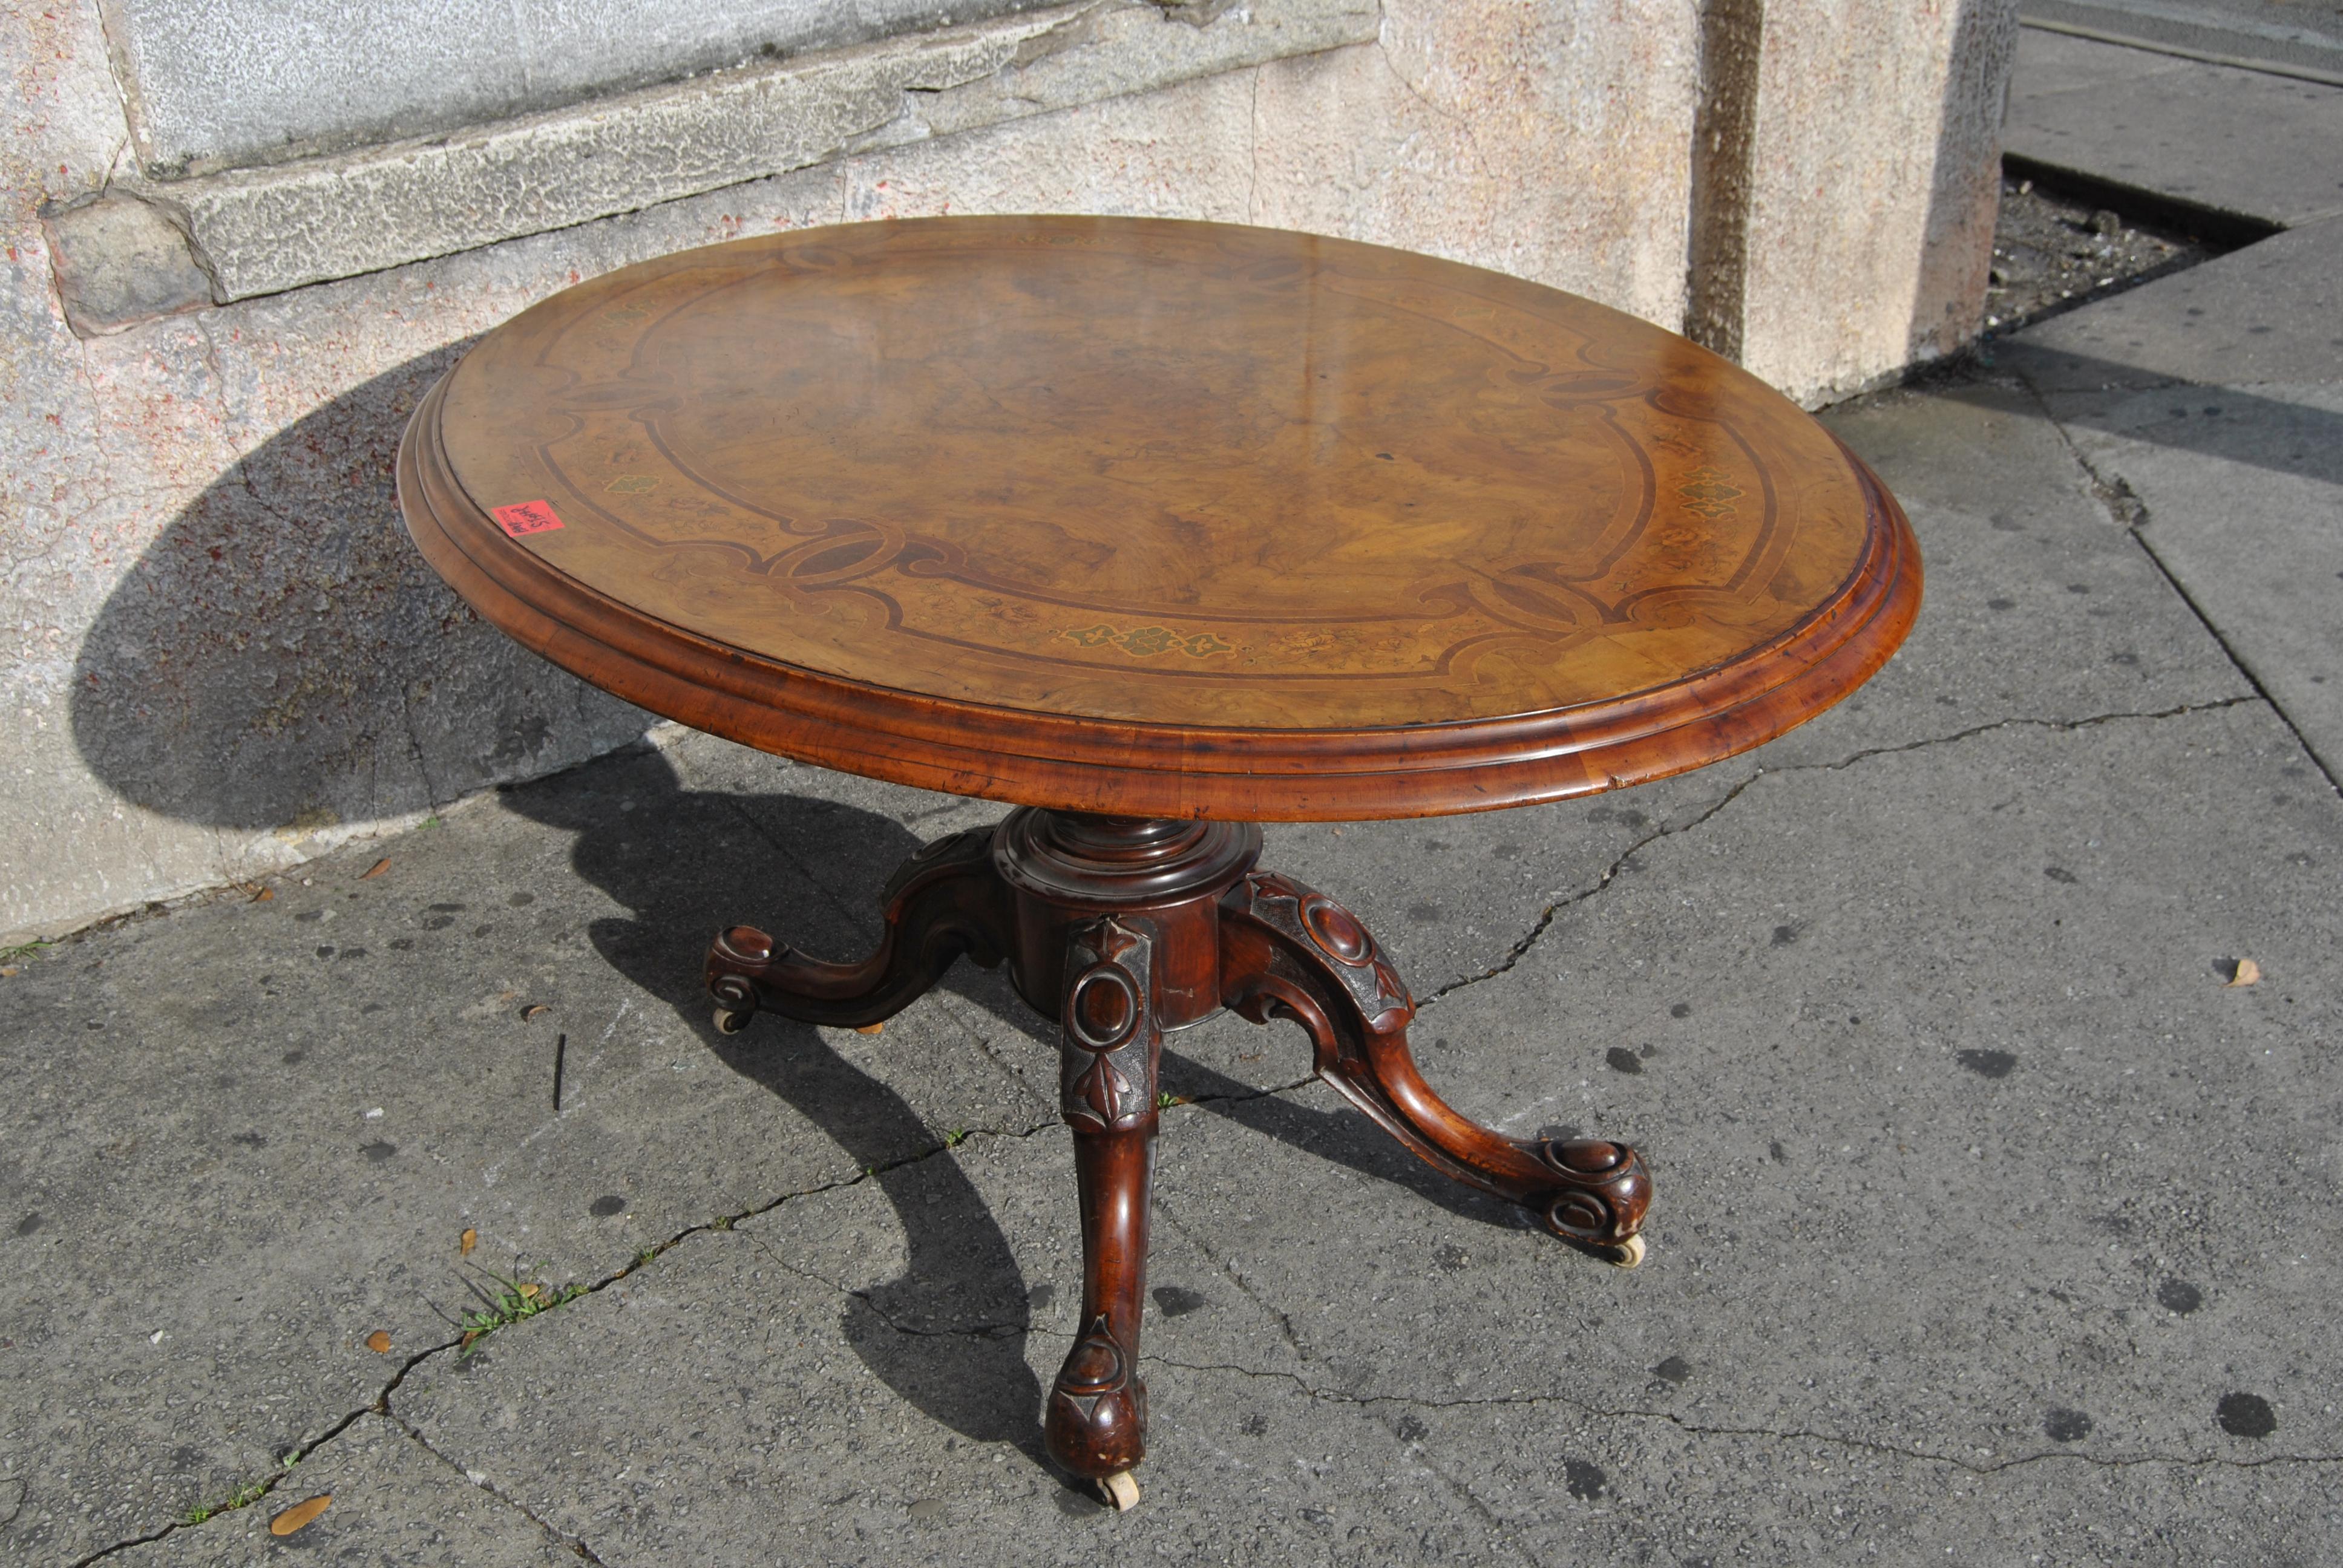 This is a tilt-top table / breakfast table made in England, circa 1850. The top of the table has a nicely molded edge and is finished in a fabulous cut of Kashmir Walnut (this is the finest cut of burr walnut). There is a beautiful and highly inlaid